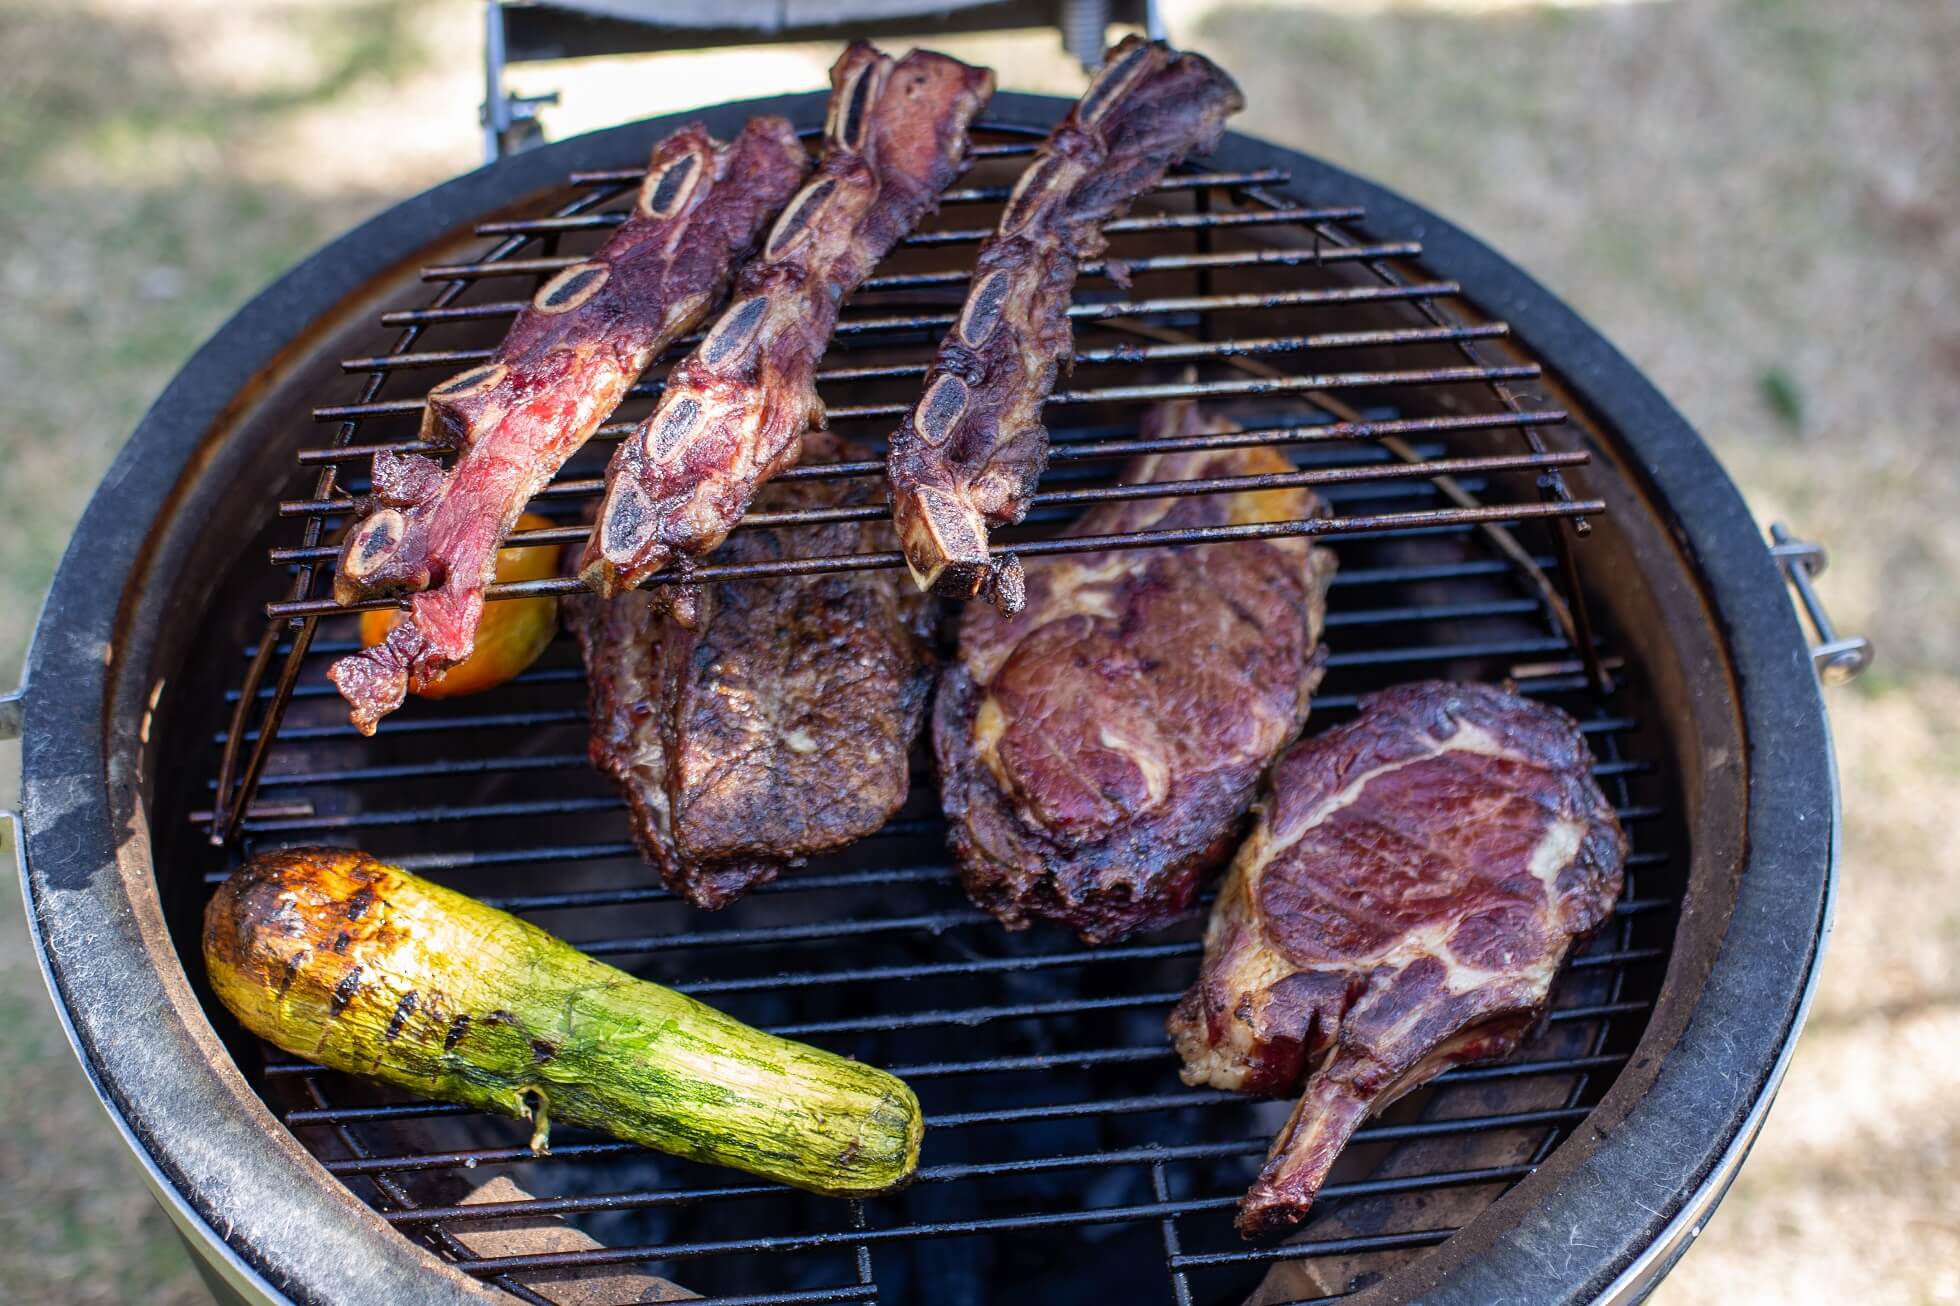 Electric, gas, or charcoal smoker - what to choose?